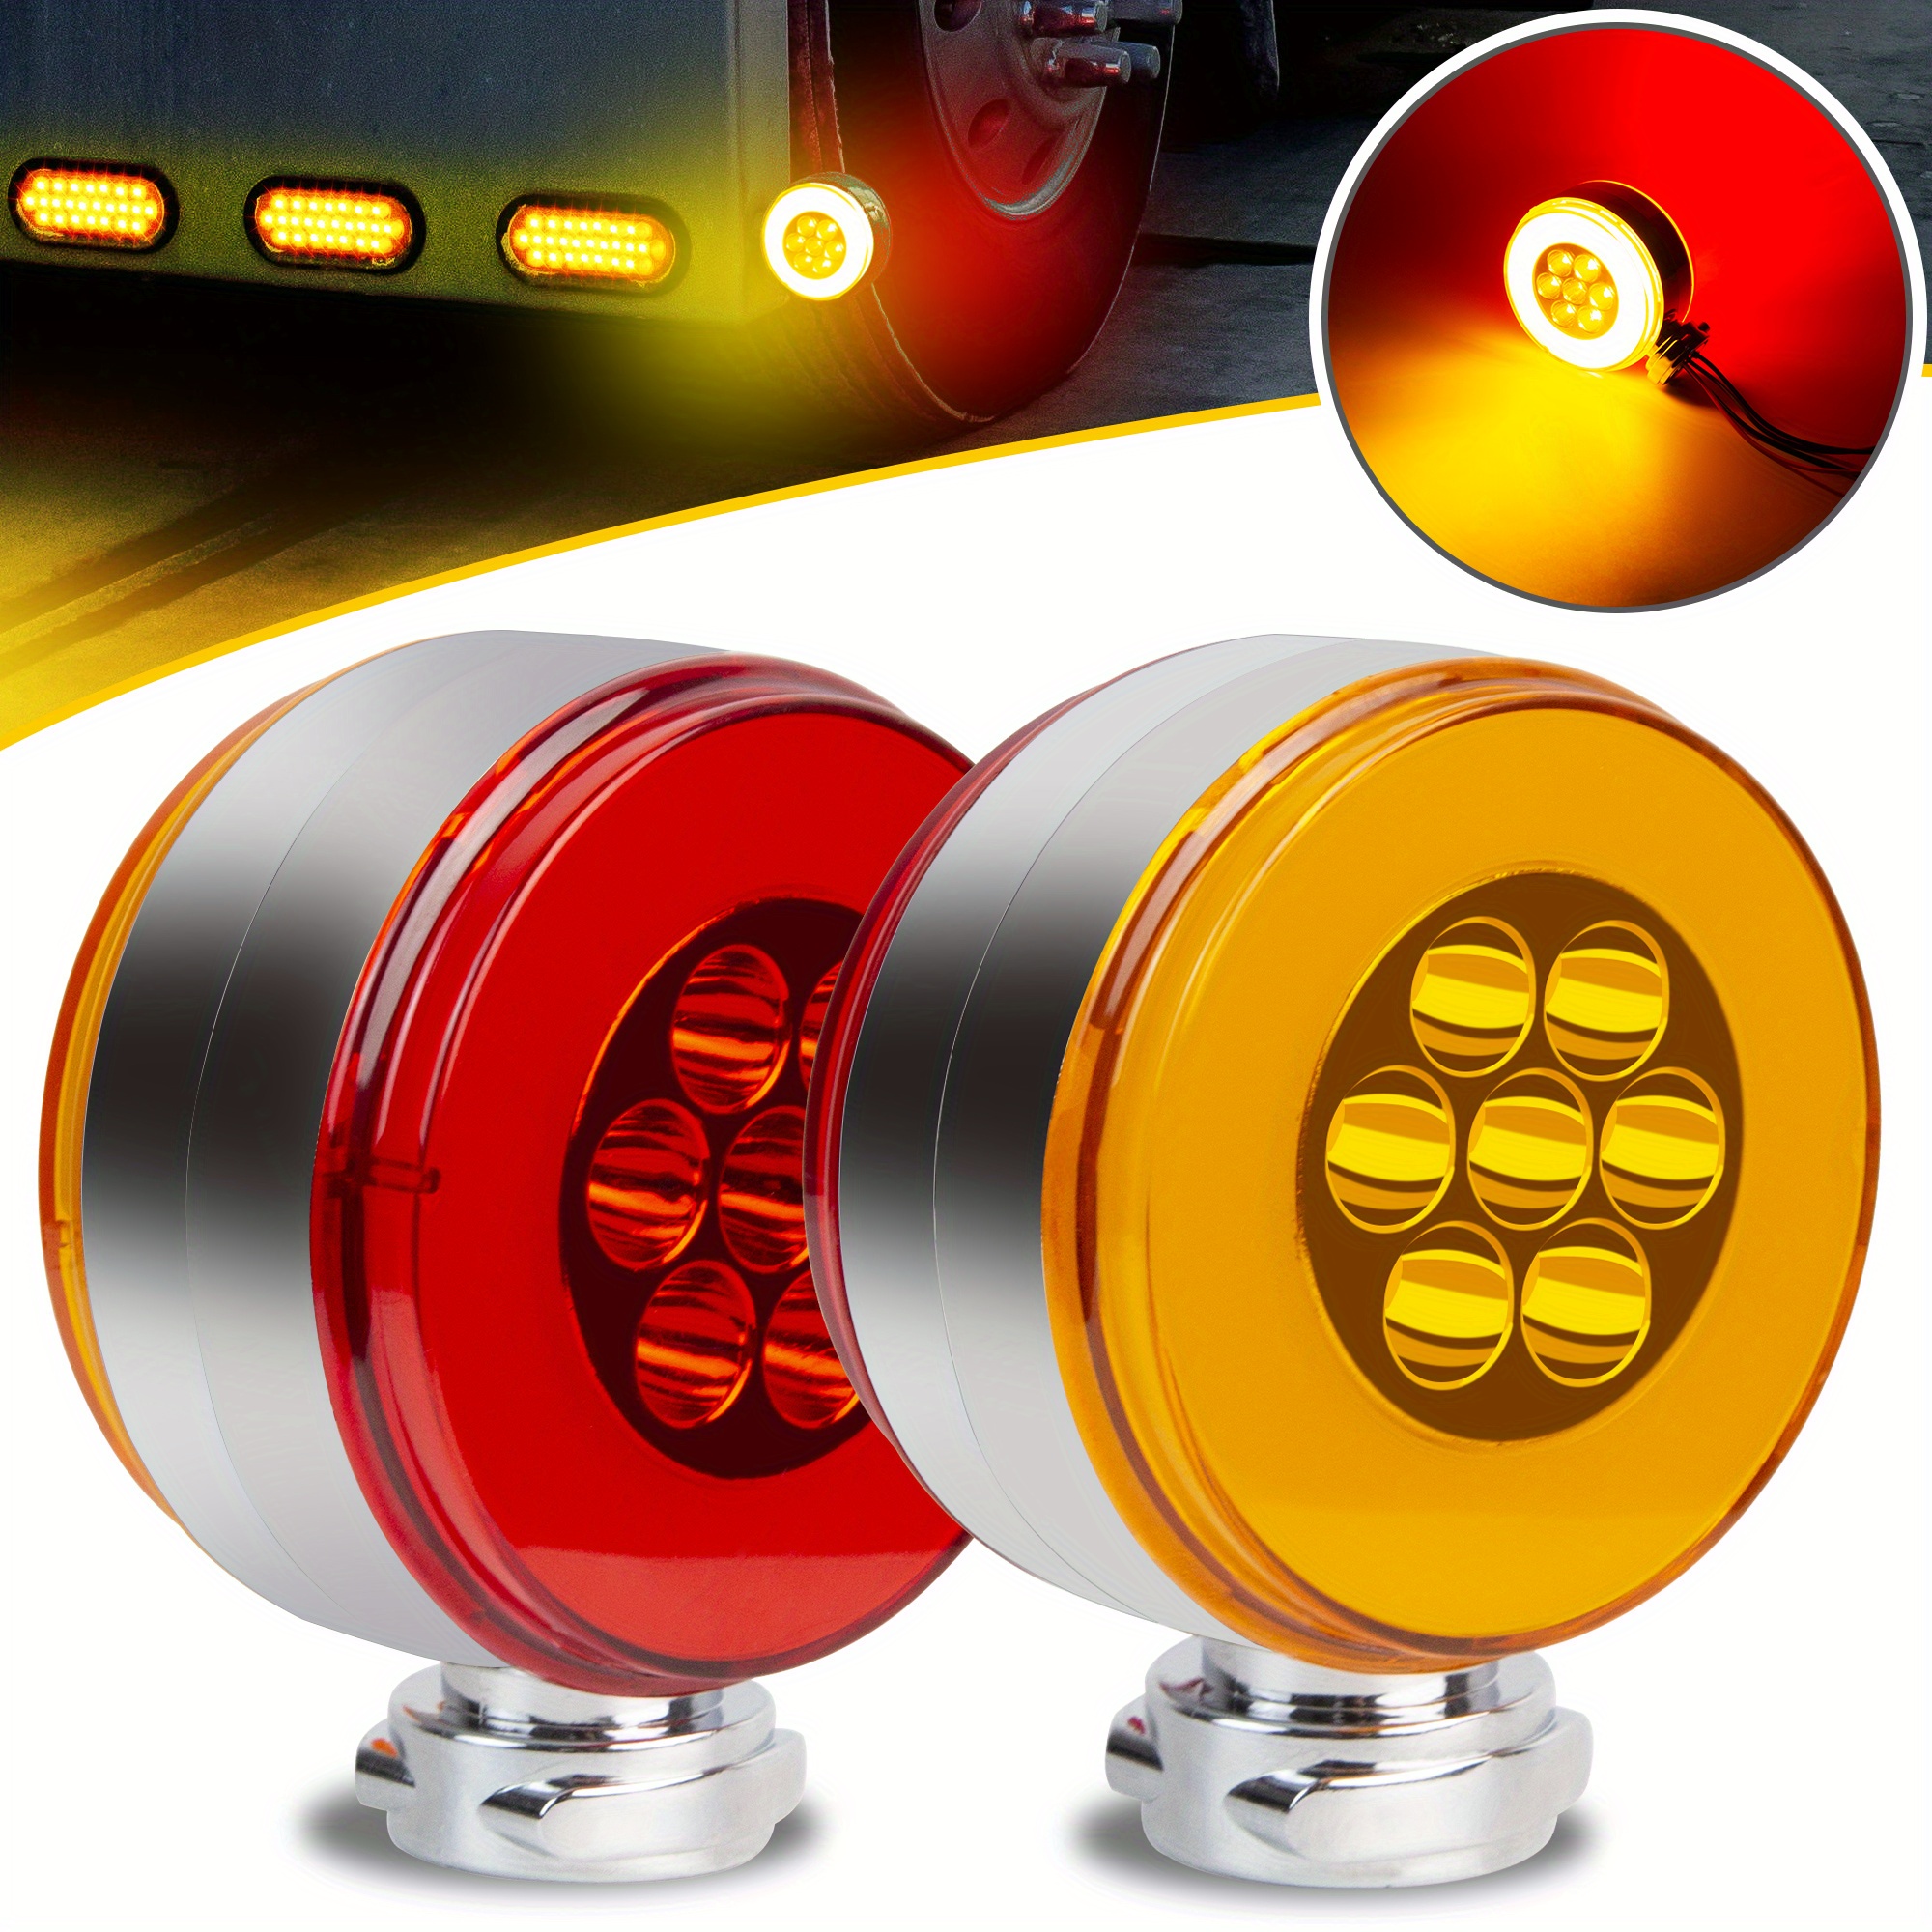 

2-piece Dual-sided Amber & Red Led Fender Lights - Easy Stud Mount, 14-led Stop, Turn, Tail Signal For Trailers